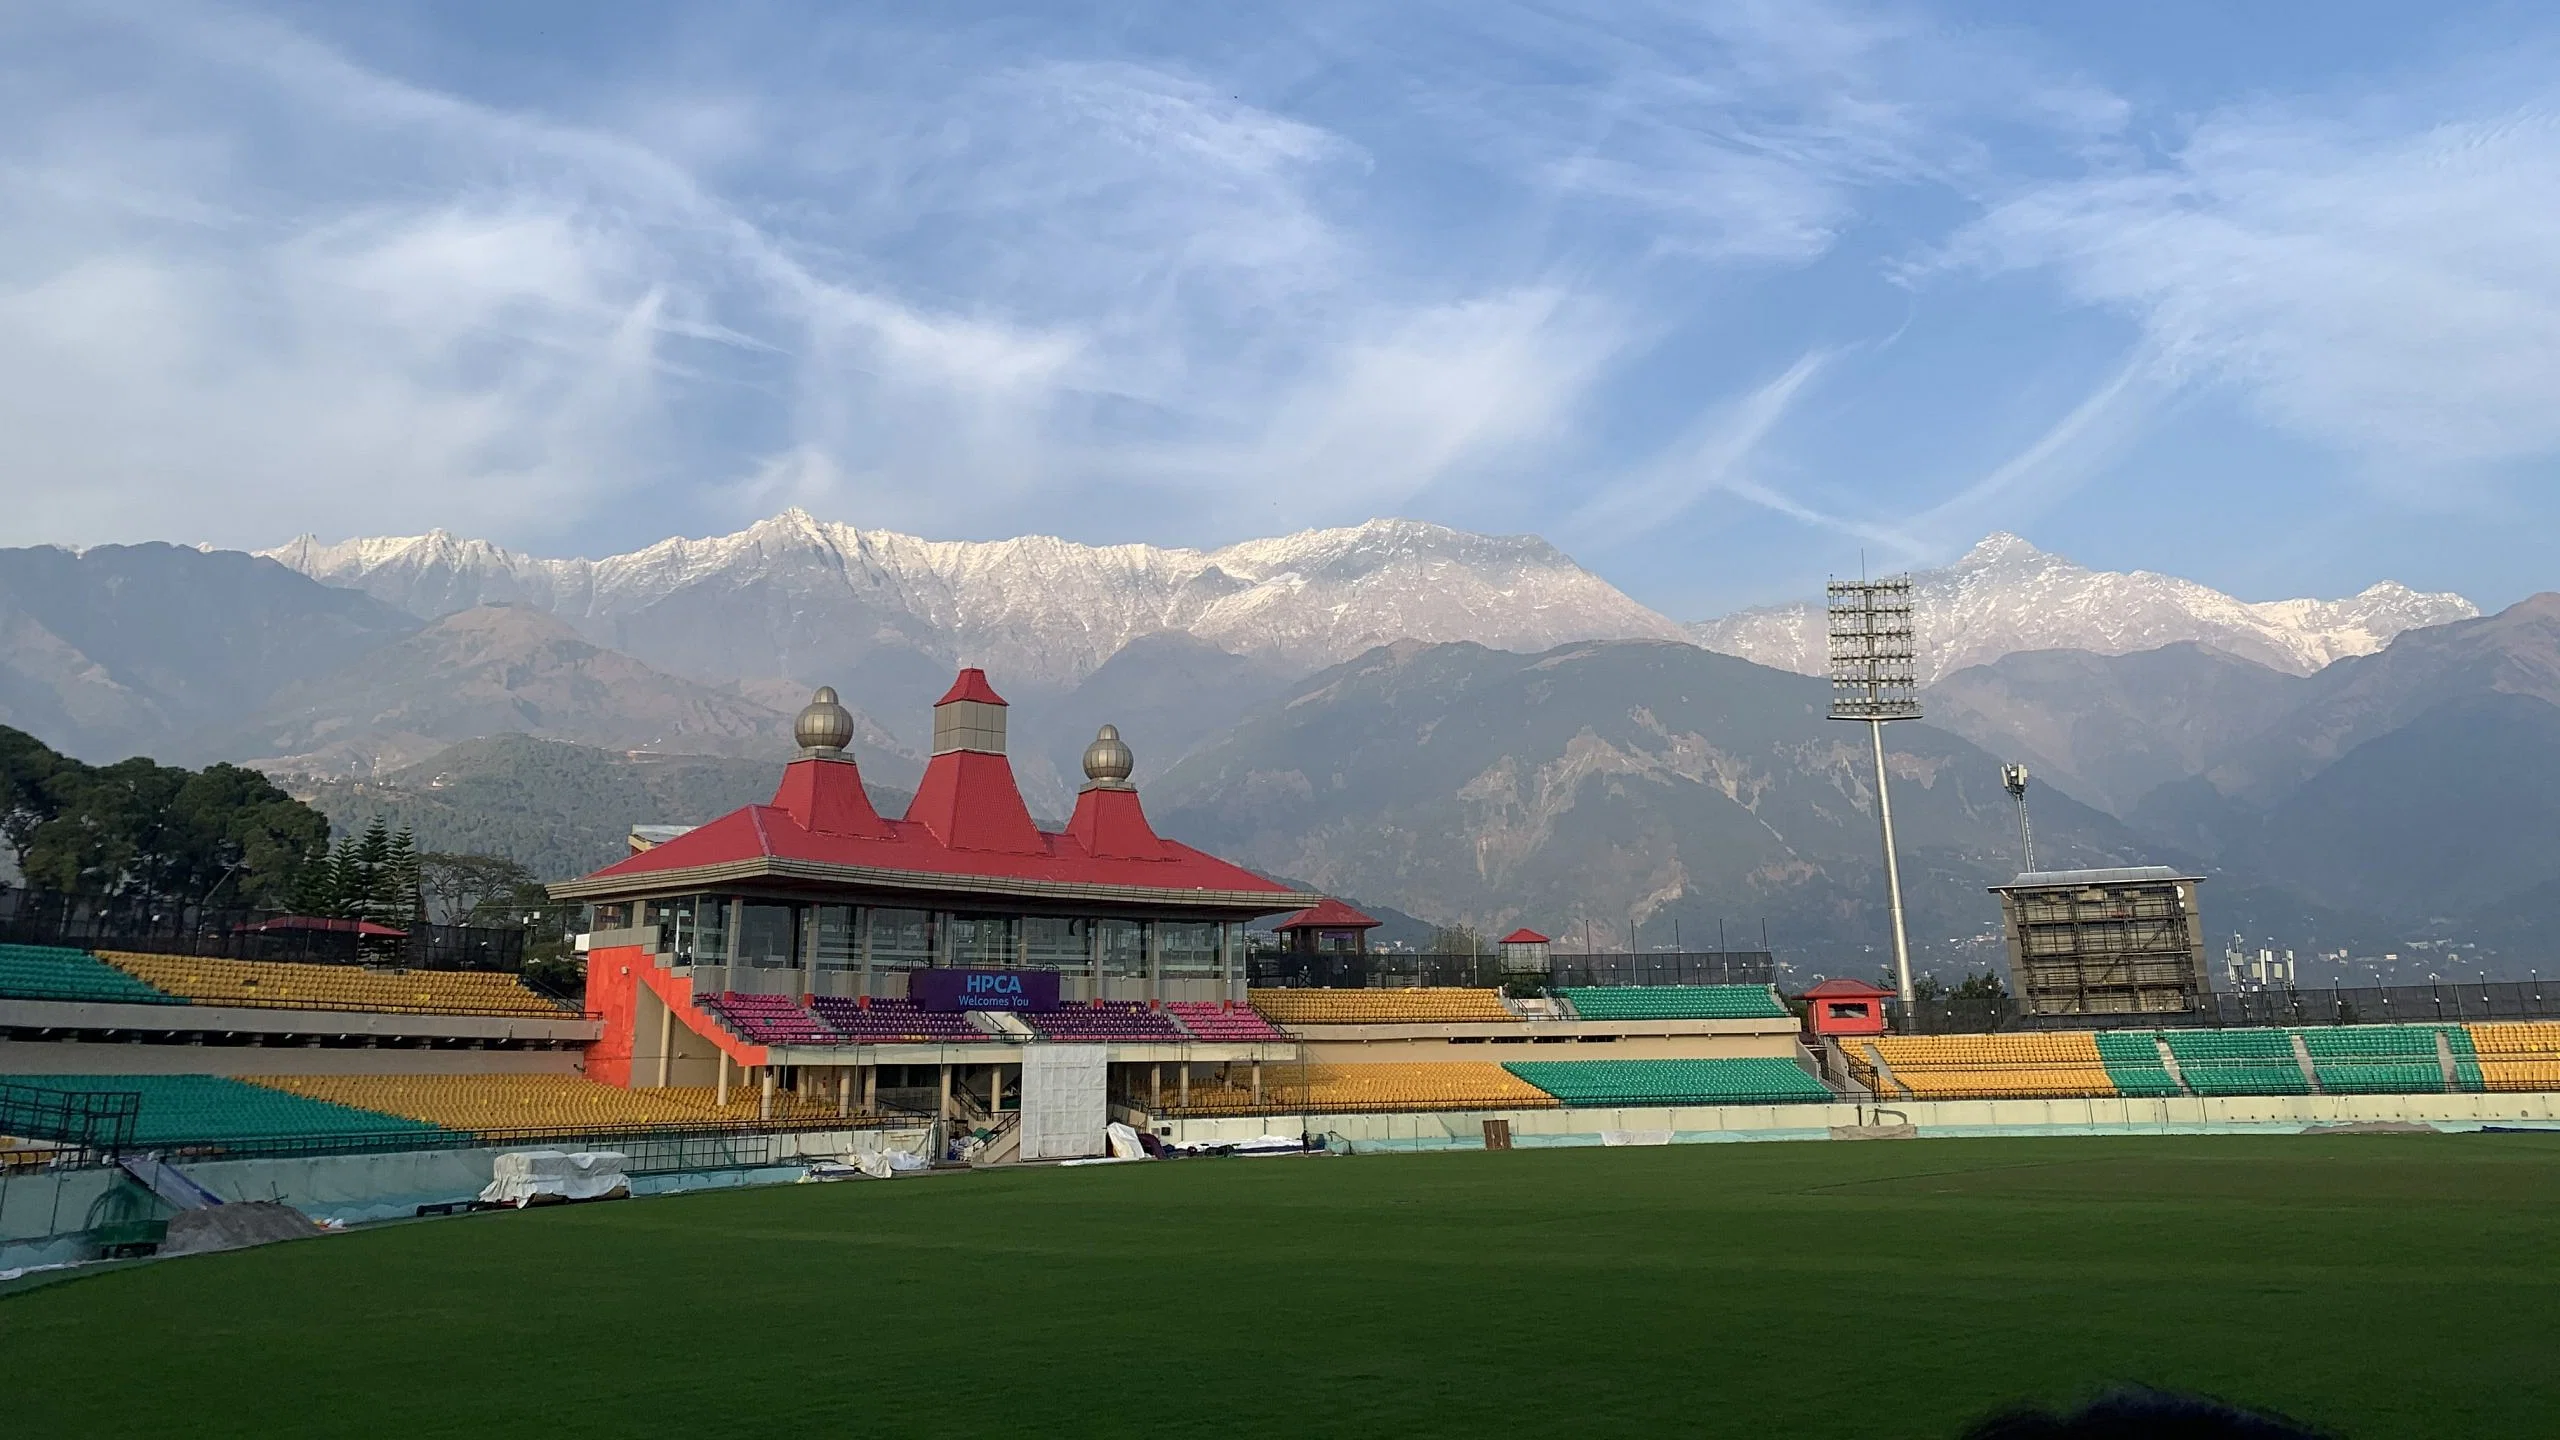 Sunset over Dharamsala Cricket Ground, casting a golden glow over the stadium and highlighting the traditional Himachali architectural style of the pavilions.